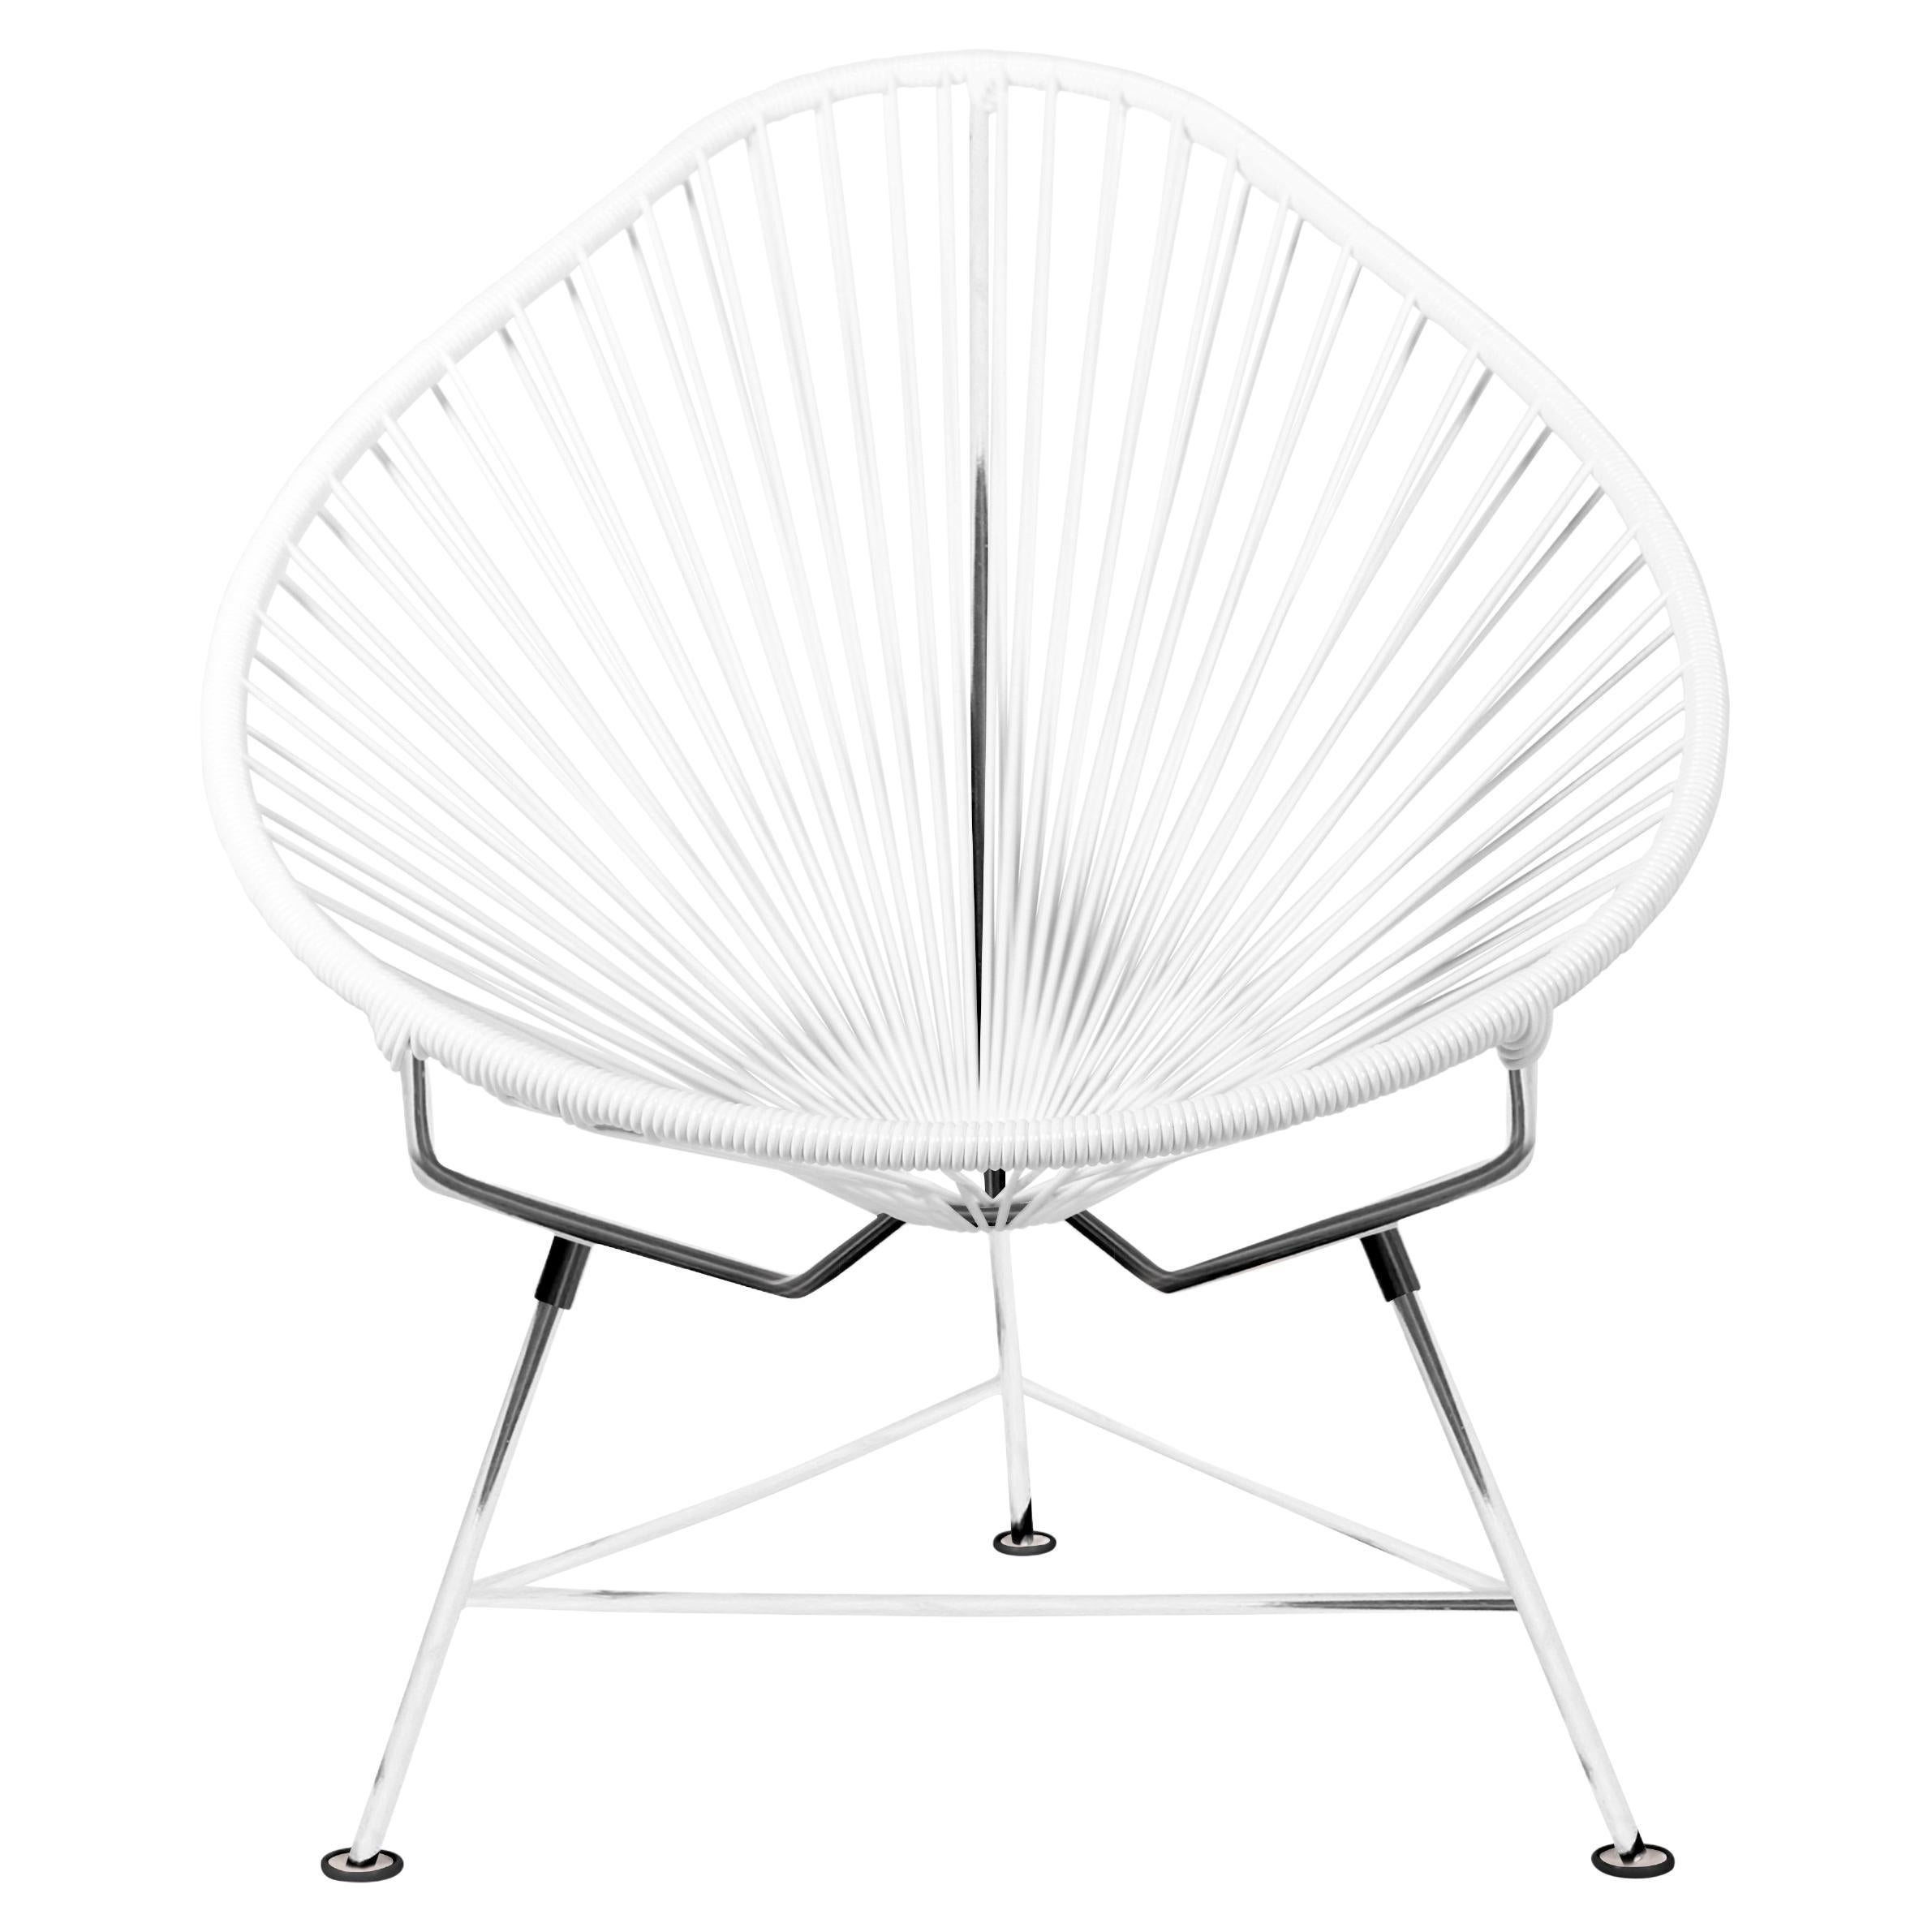 Innit Designs Acapulco Chair White Weave on Chrome Frame